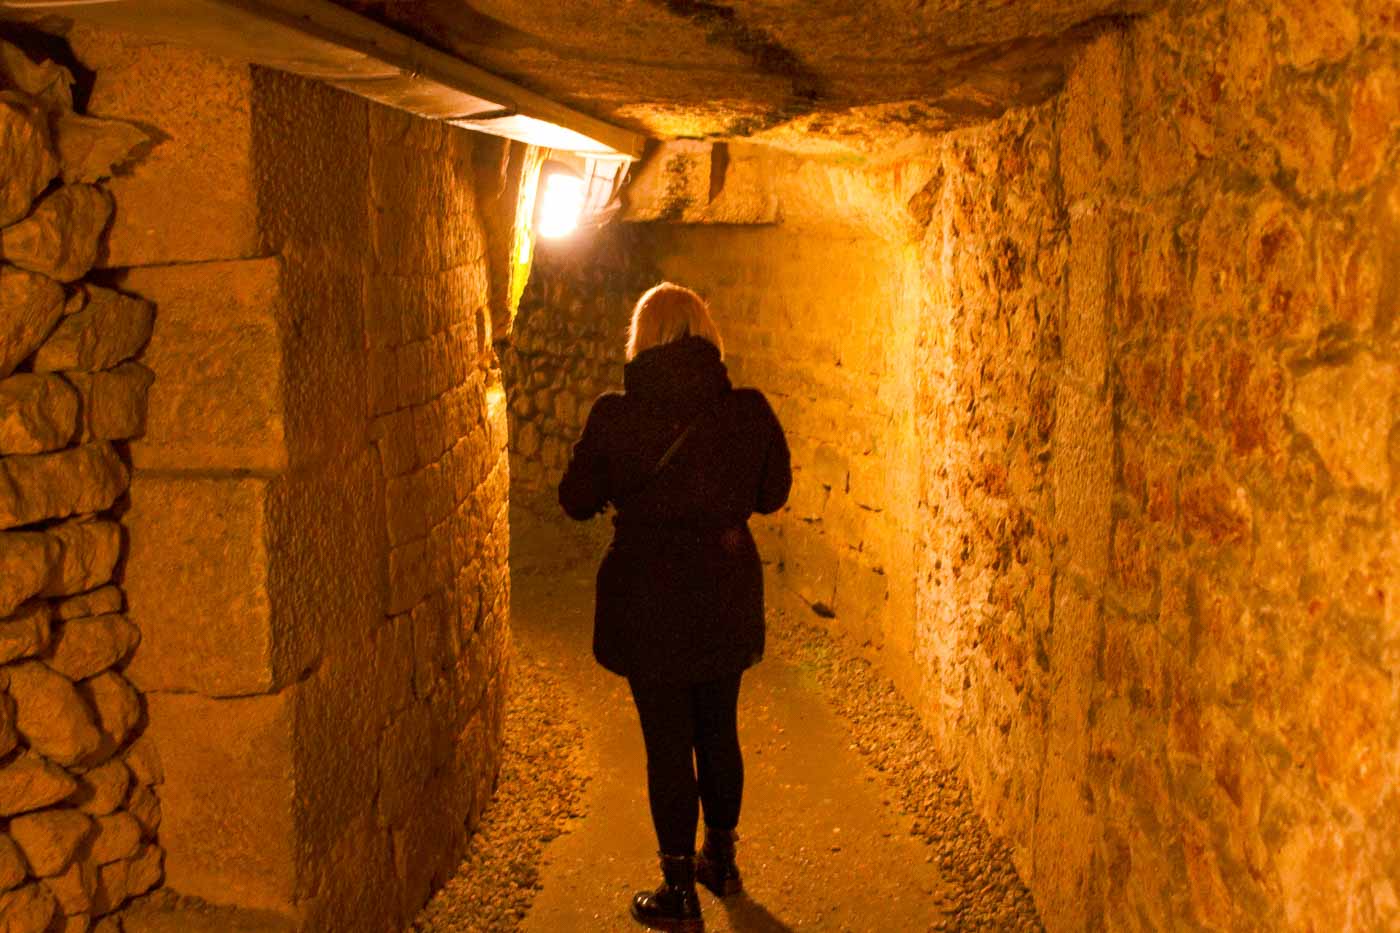 Under the romantic streets of Paris lies a world of darkness filled with the skeletal remains of millions of people. The Paris Catacombs hold a strange appeal, drawing those fascinated by the macabre and off-the-beaten-path history. 